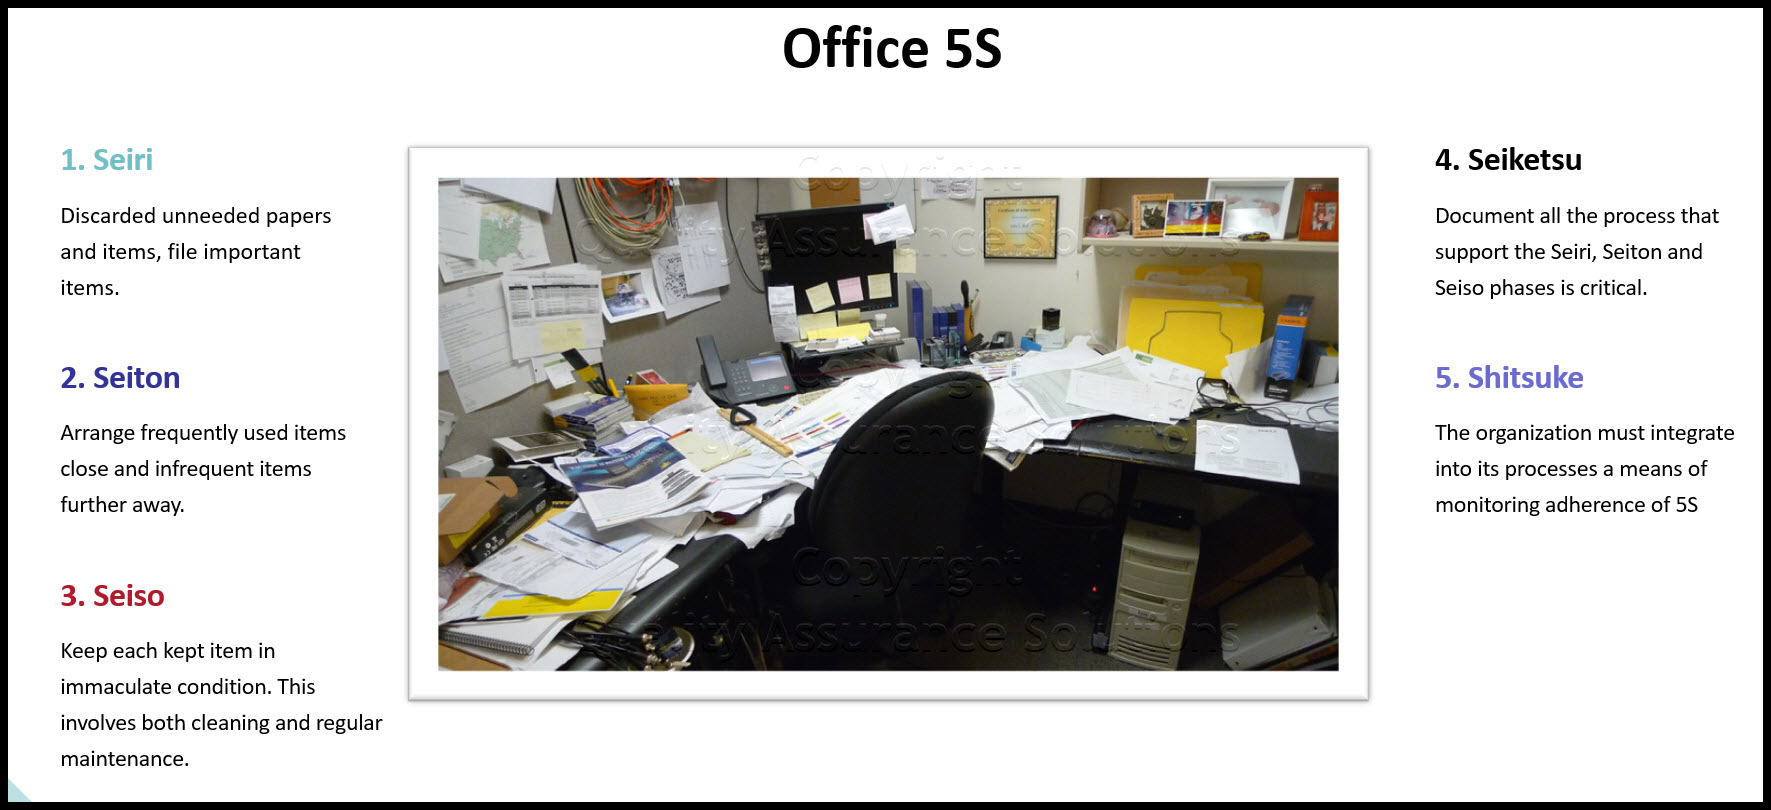 Japan’s office 5S sets a standard that business offices should follow. Learn more about the 5S office here. 